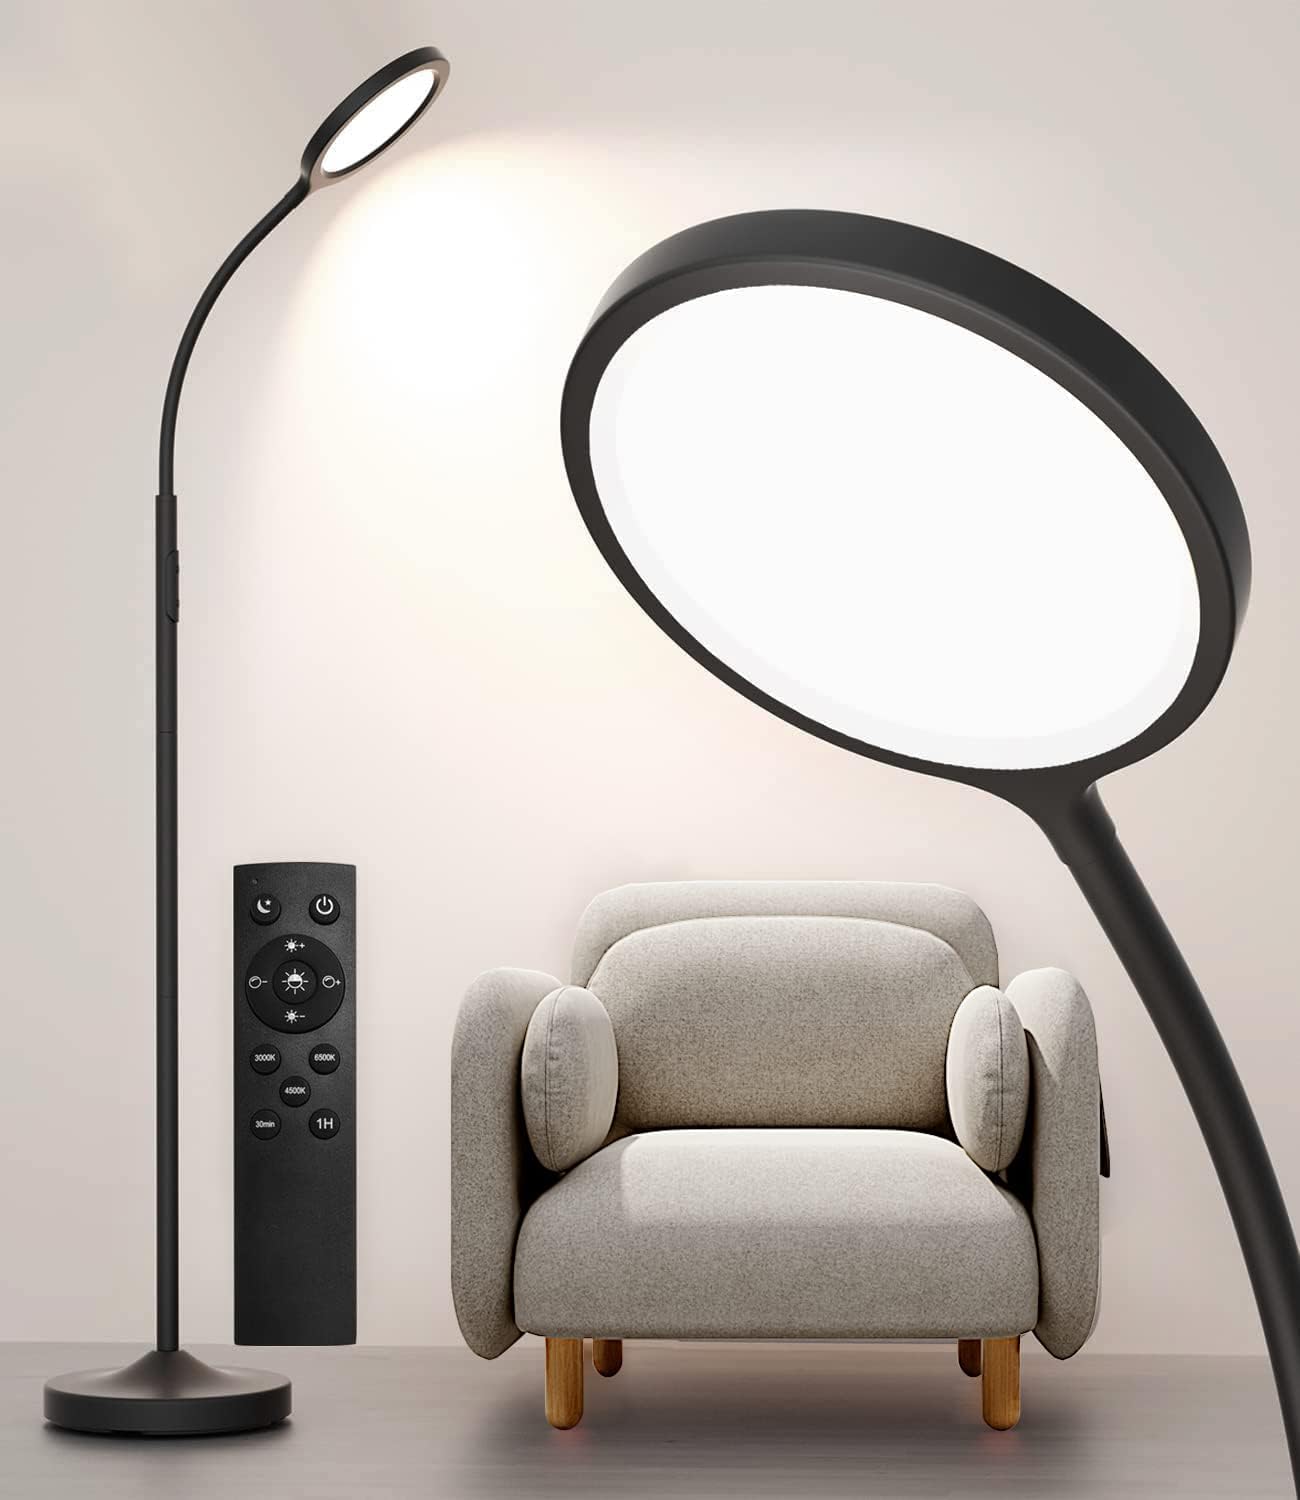 luckystyle Floor Lamp,Super Bright Dimmable LED Floor [...]